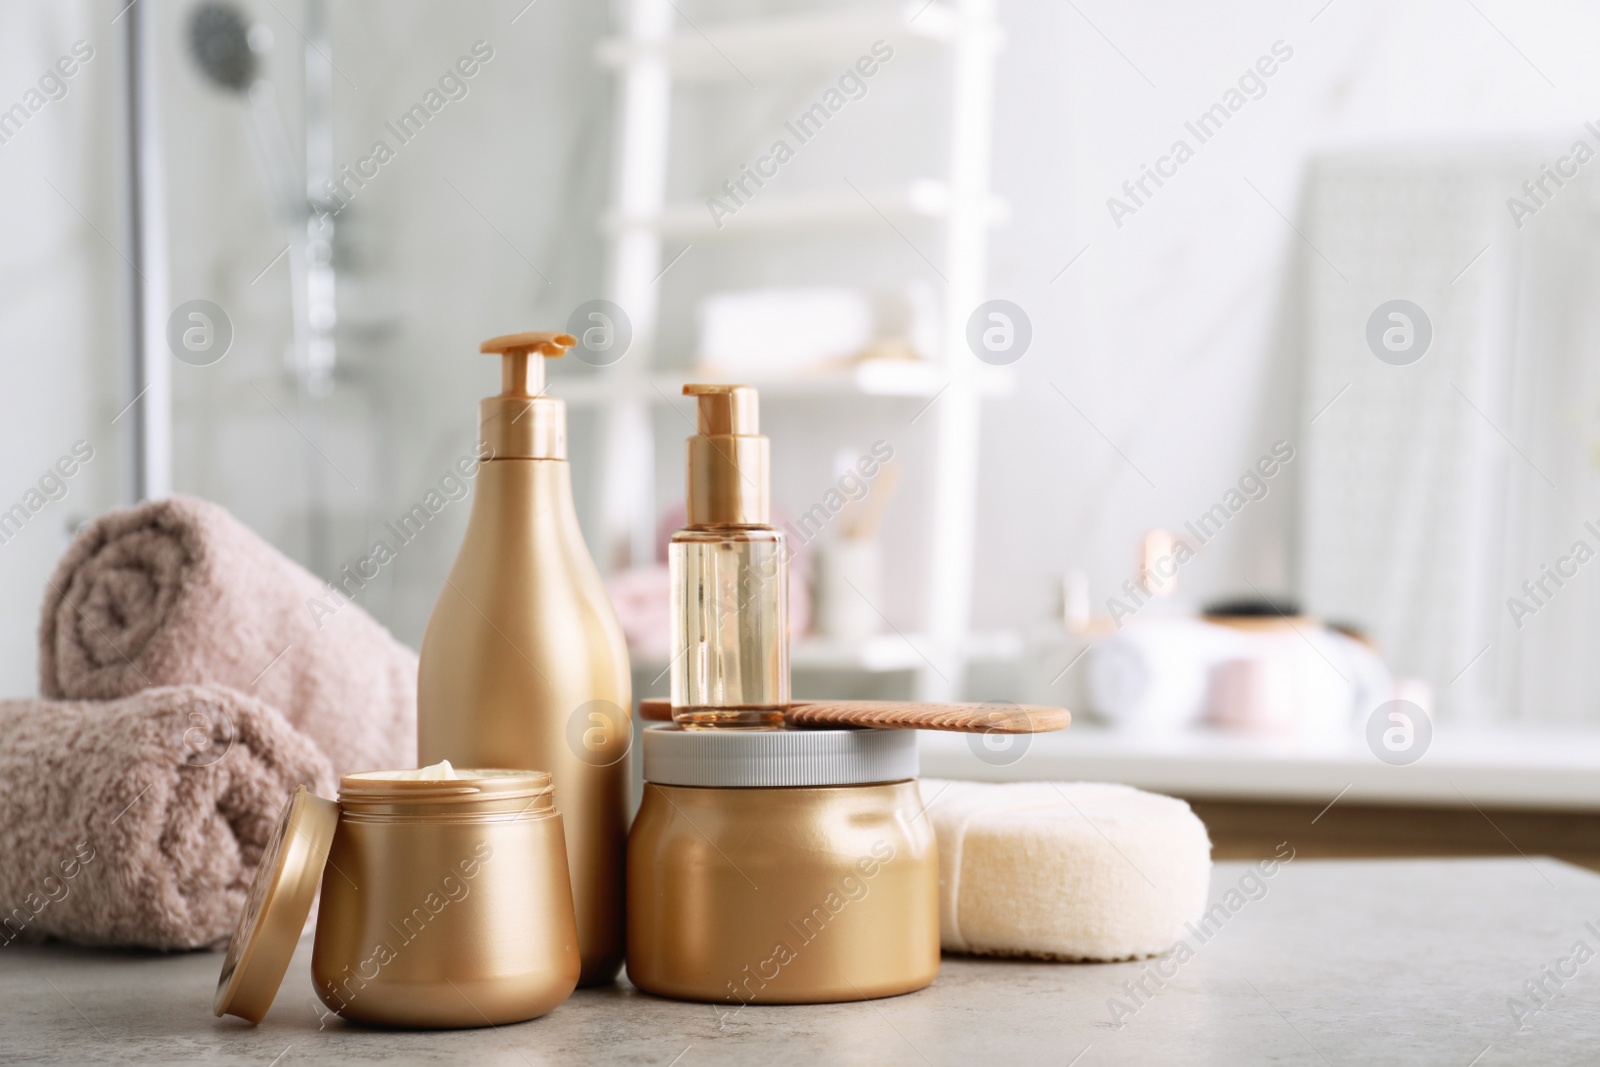 Photo of Different hair care products, towels and comb on table in bathroom